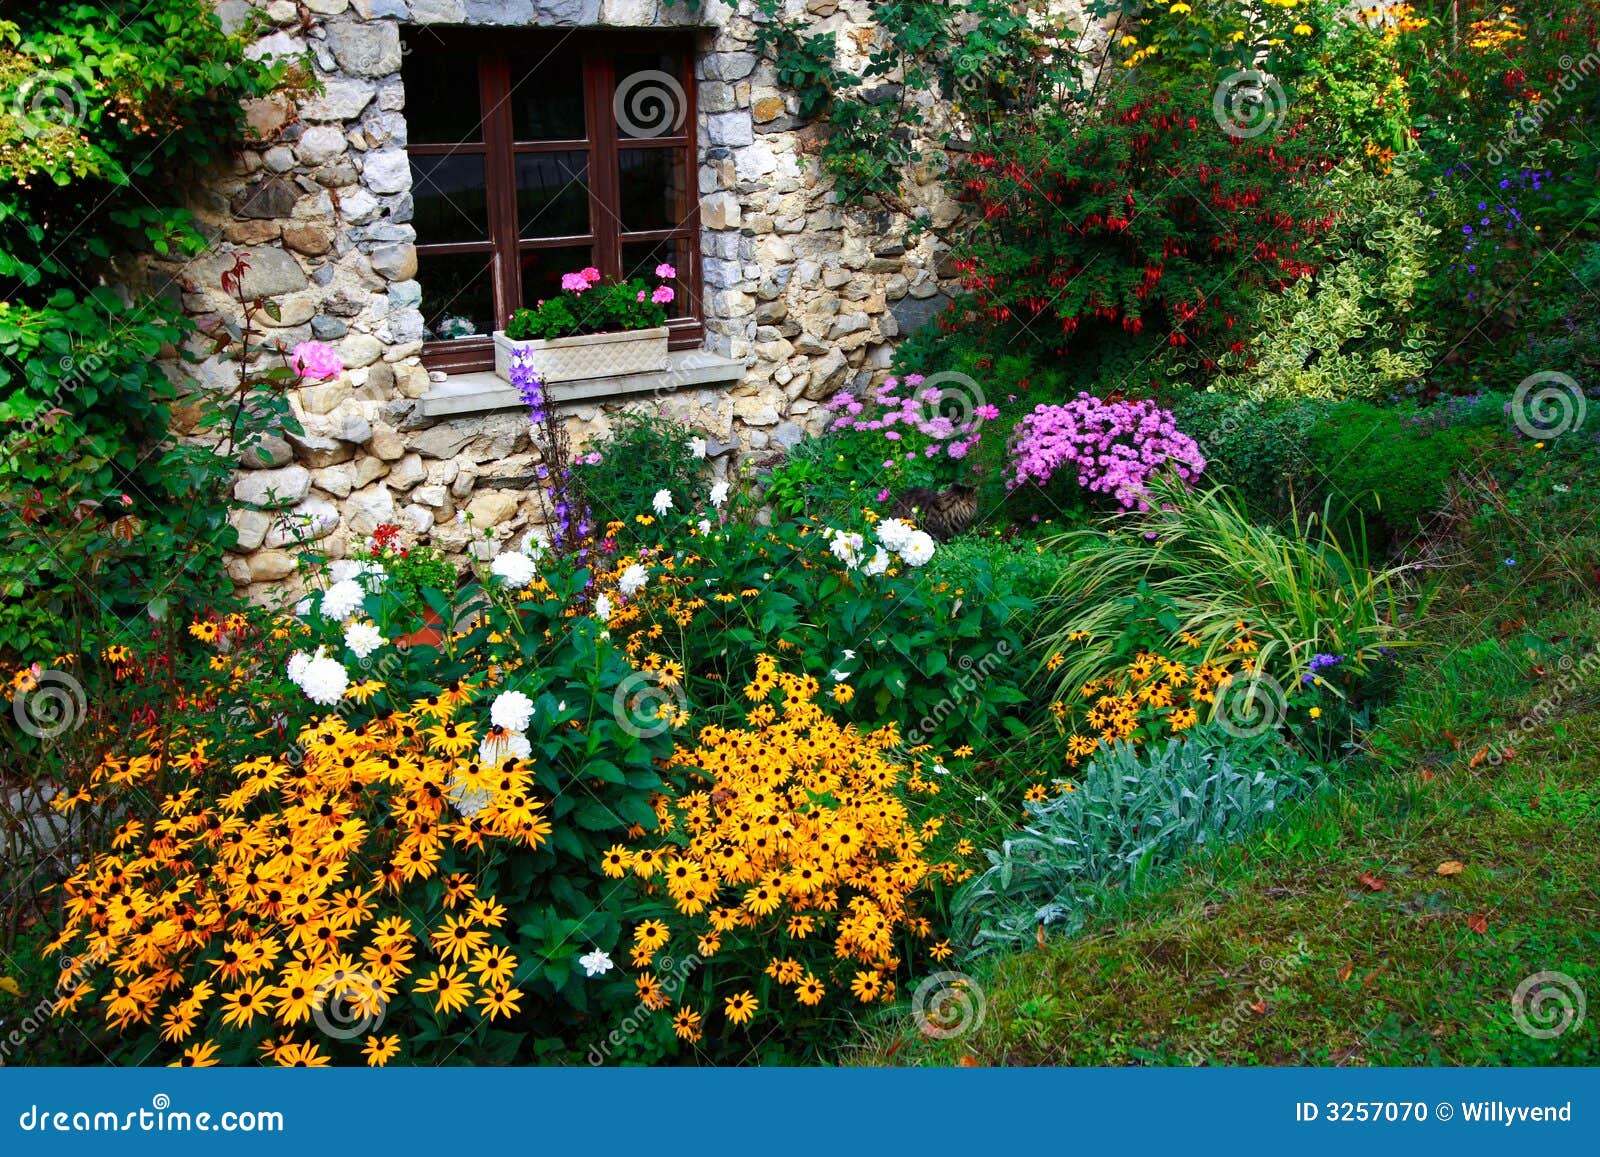 flowers and stone-built house